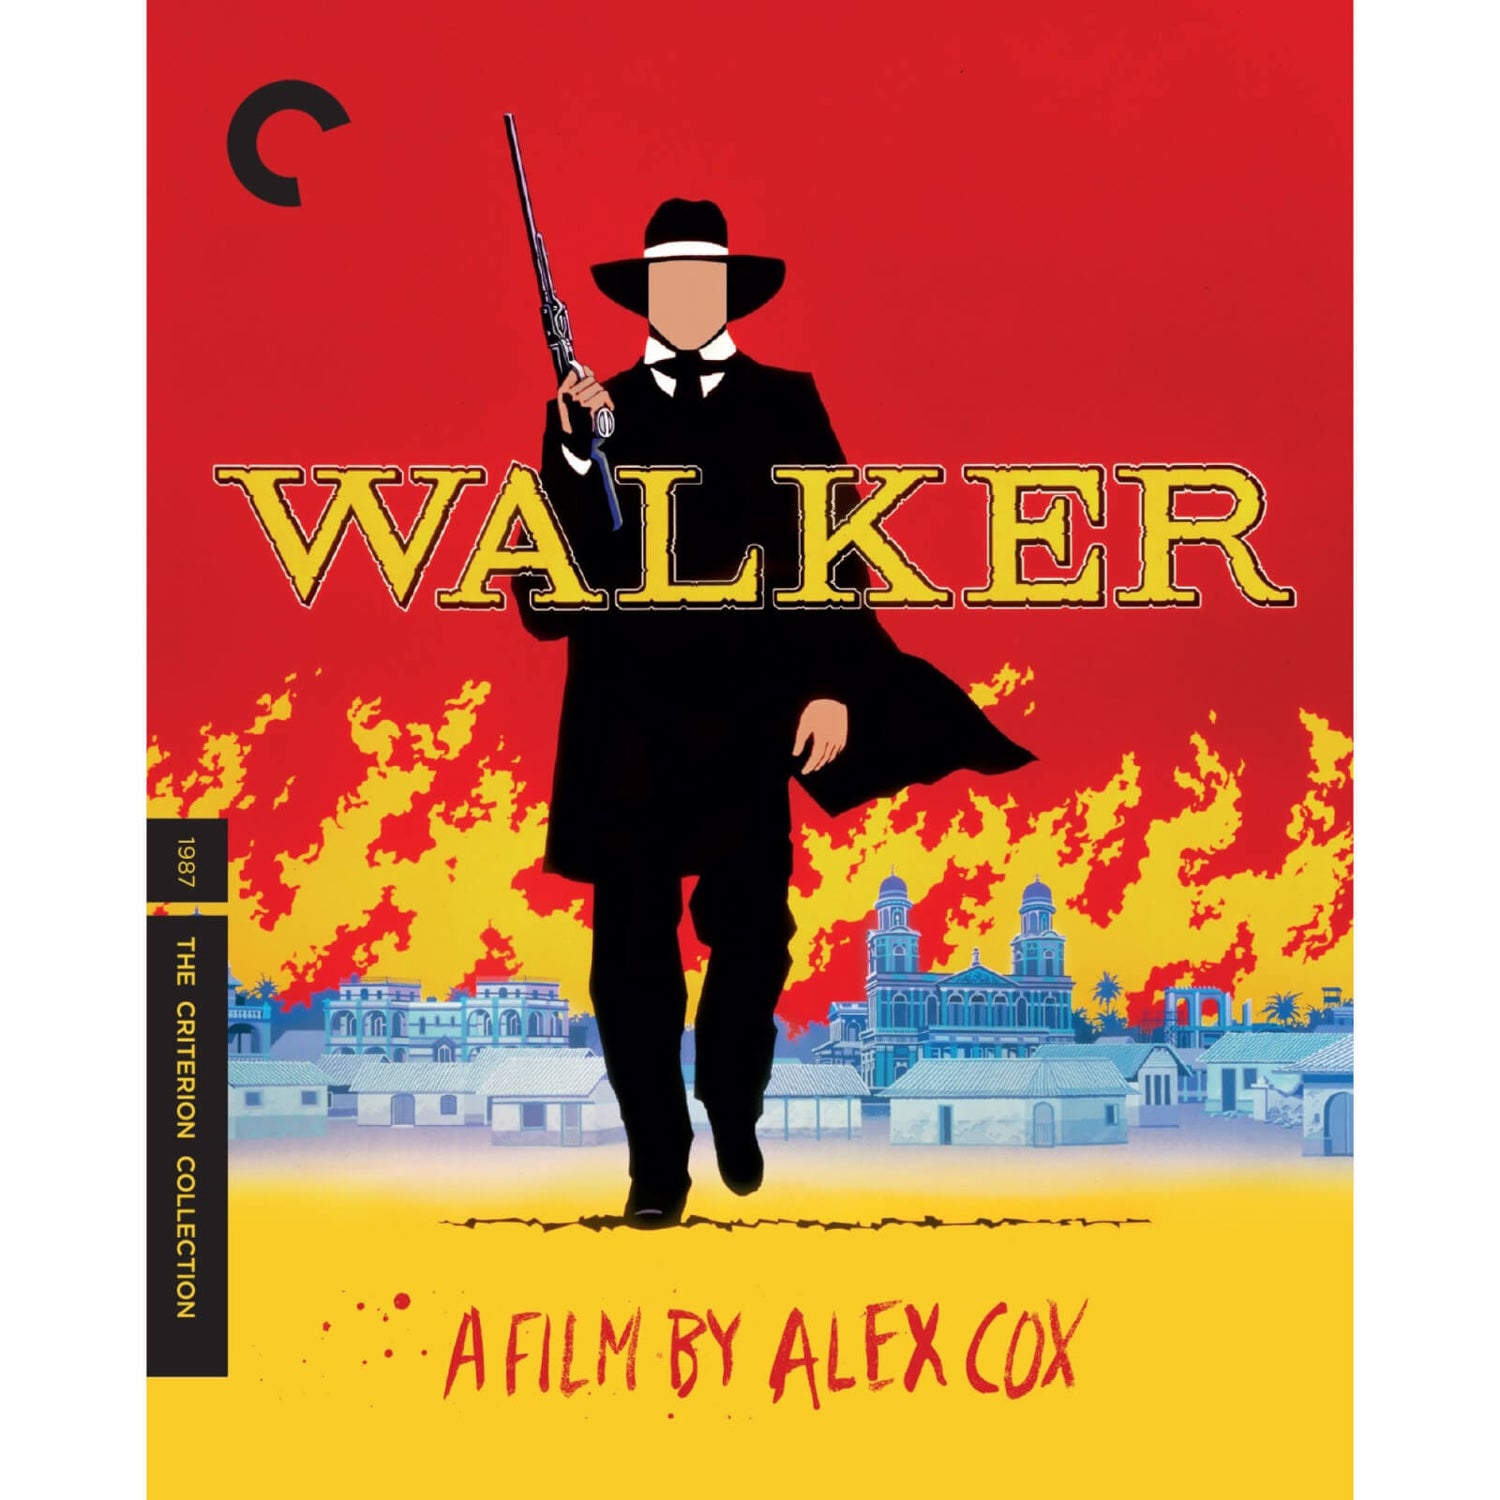 Walker - The Criterion Collection (US Import)